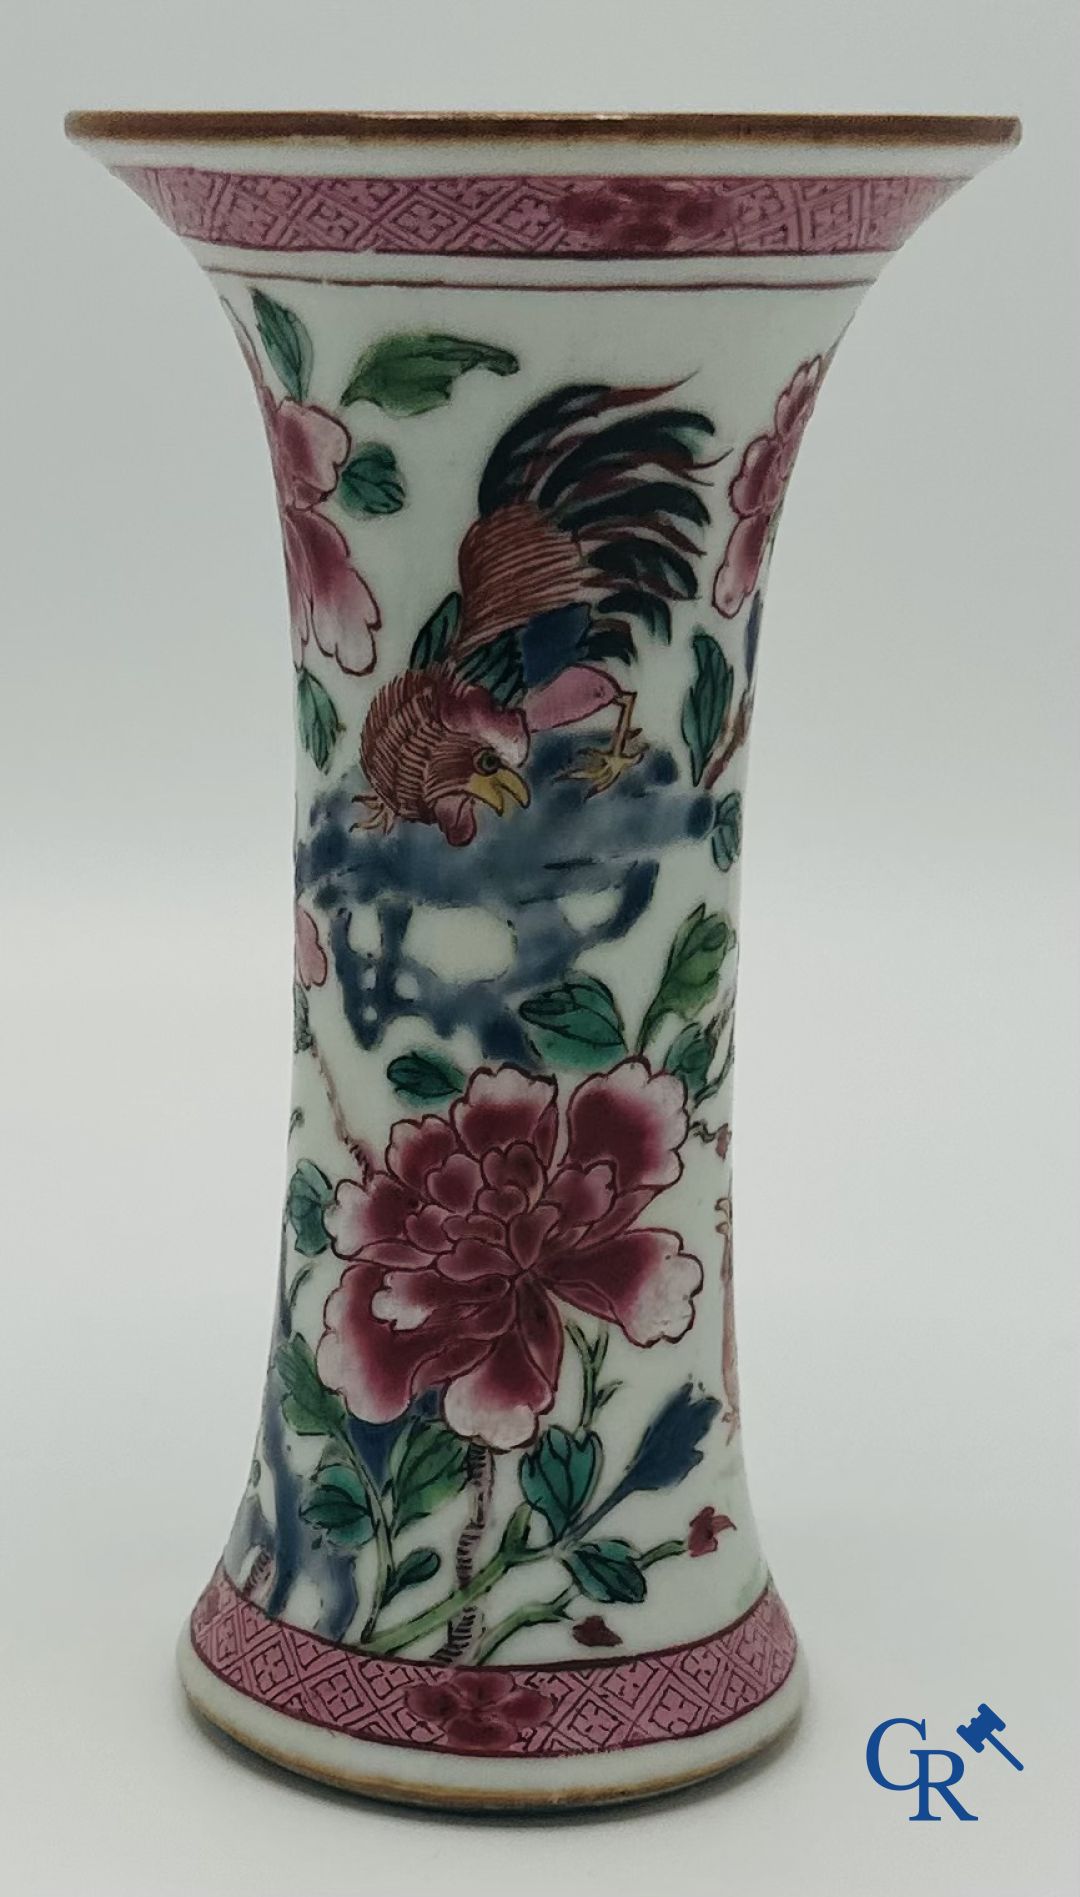 Chinese Porcelain: Lot of 6 different pieces of Chinese porcelain. 18th and 19th century. - Image 6 of 11